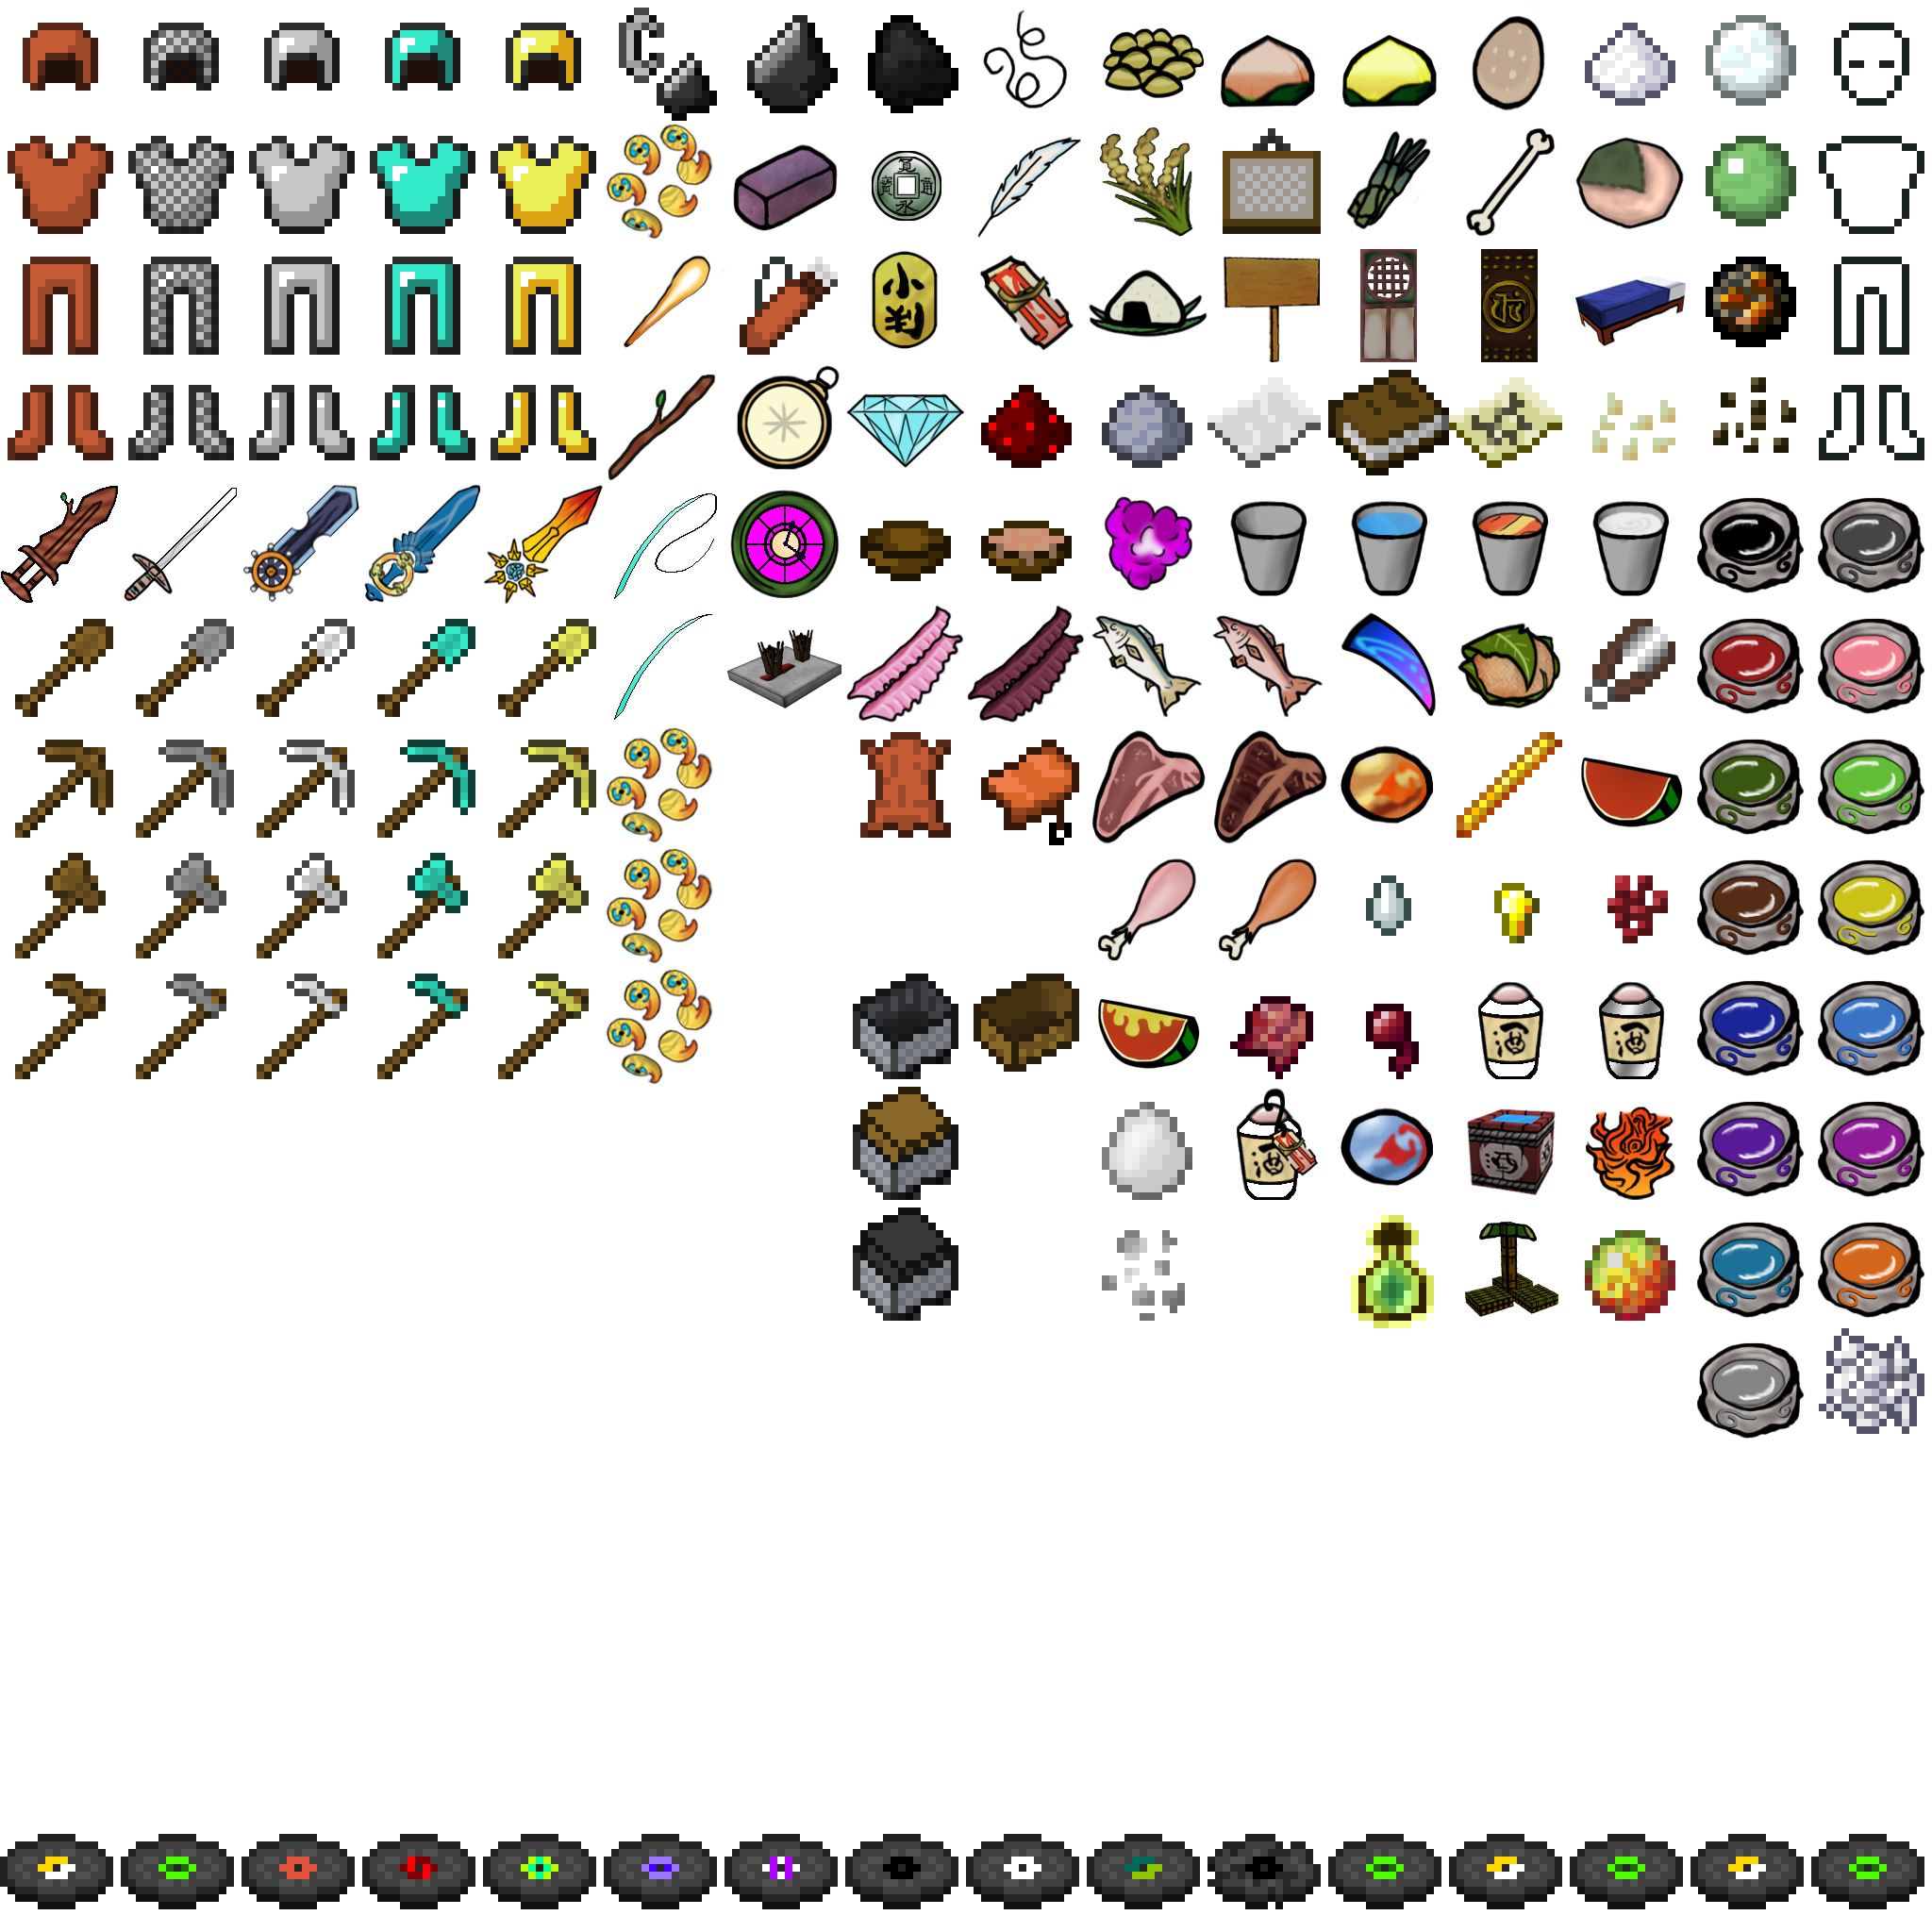 http://fc09.deviantart.net/fs70/f/2012/065/e/a/minecraft_okami_items_by_quorong-d3gdhbo.png